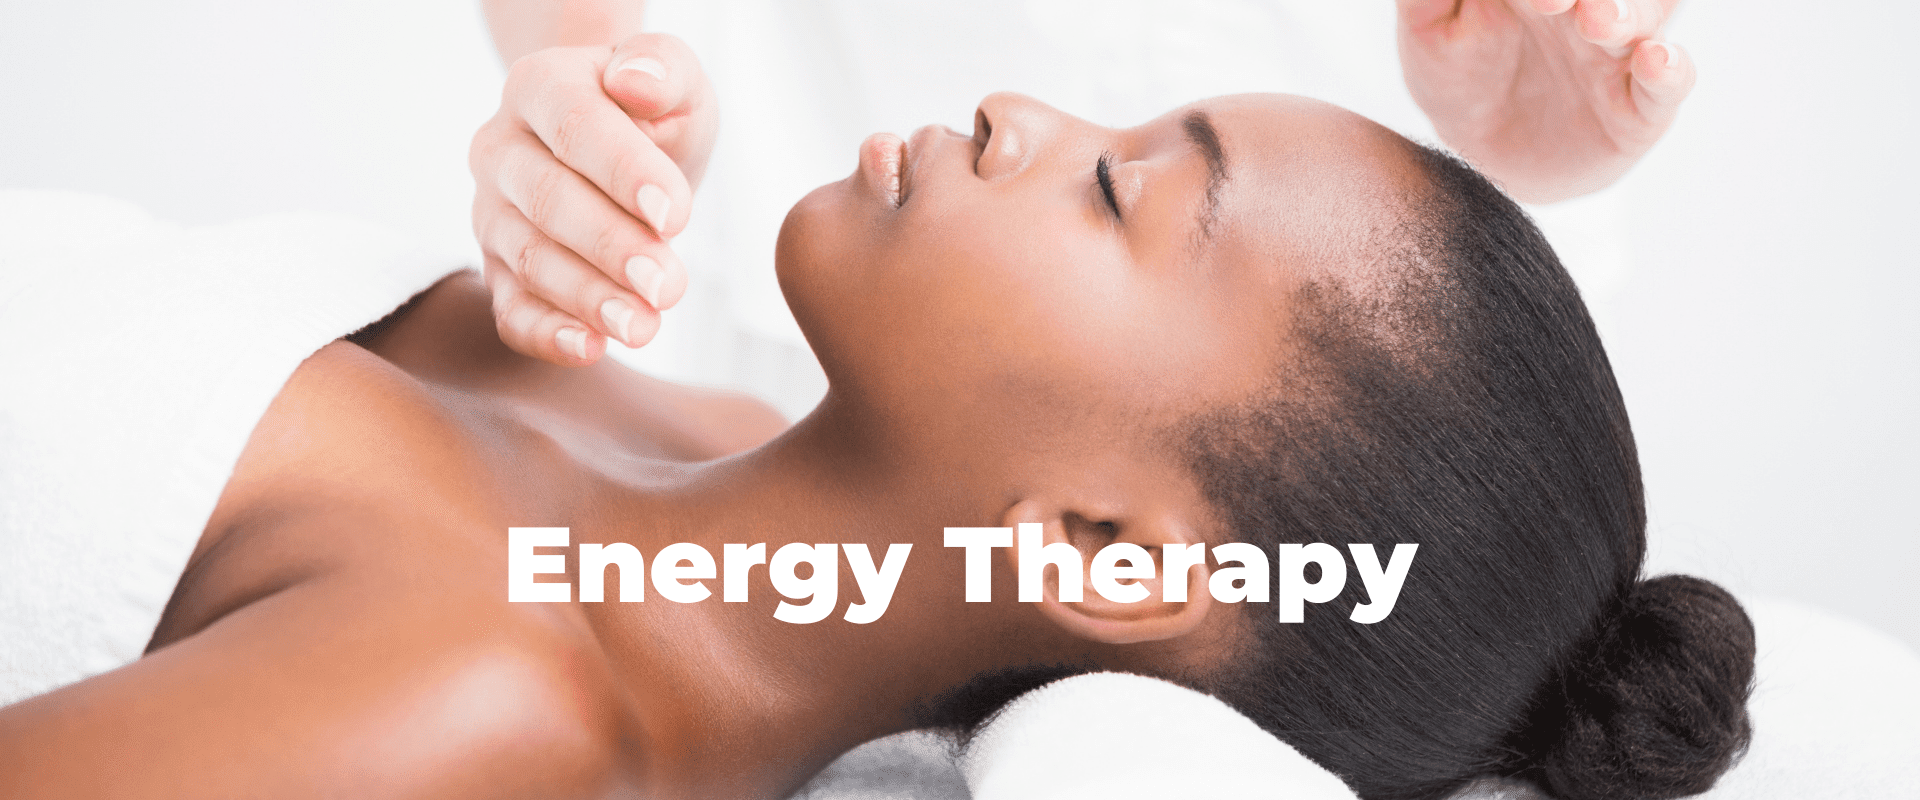 Energy Therapy